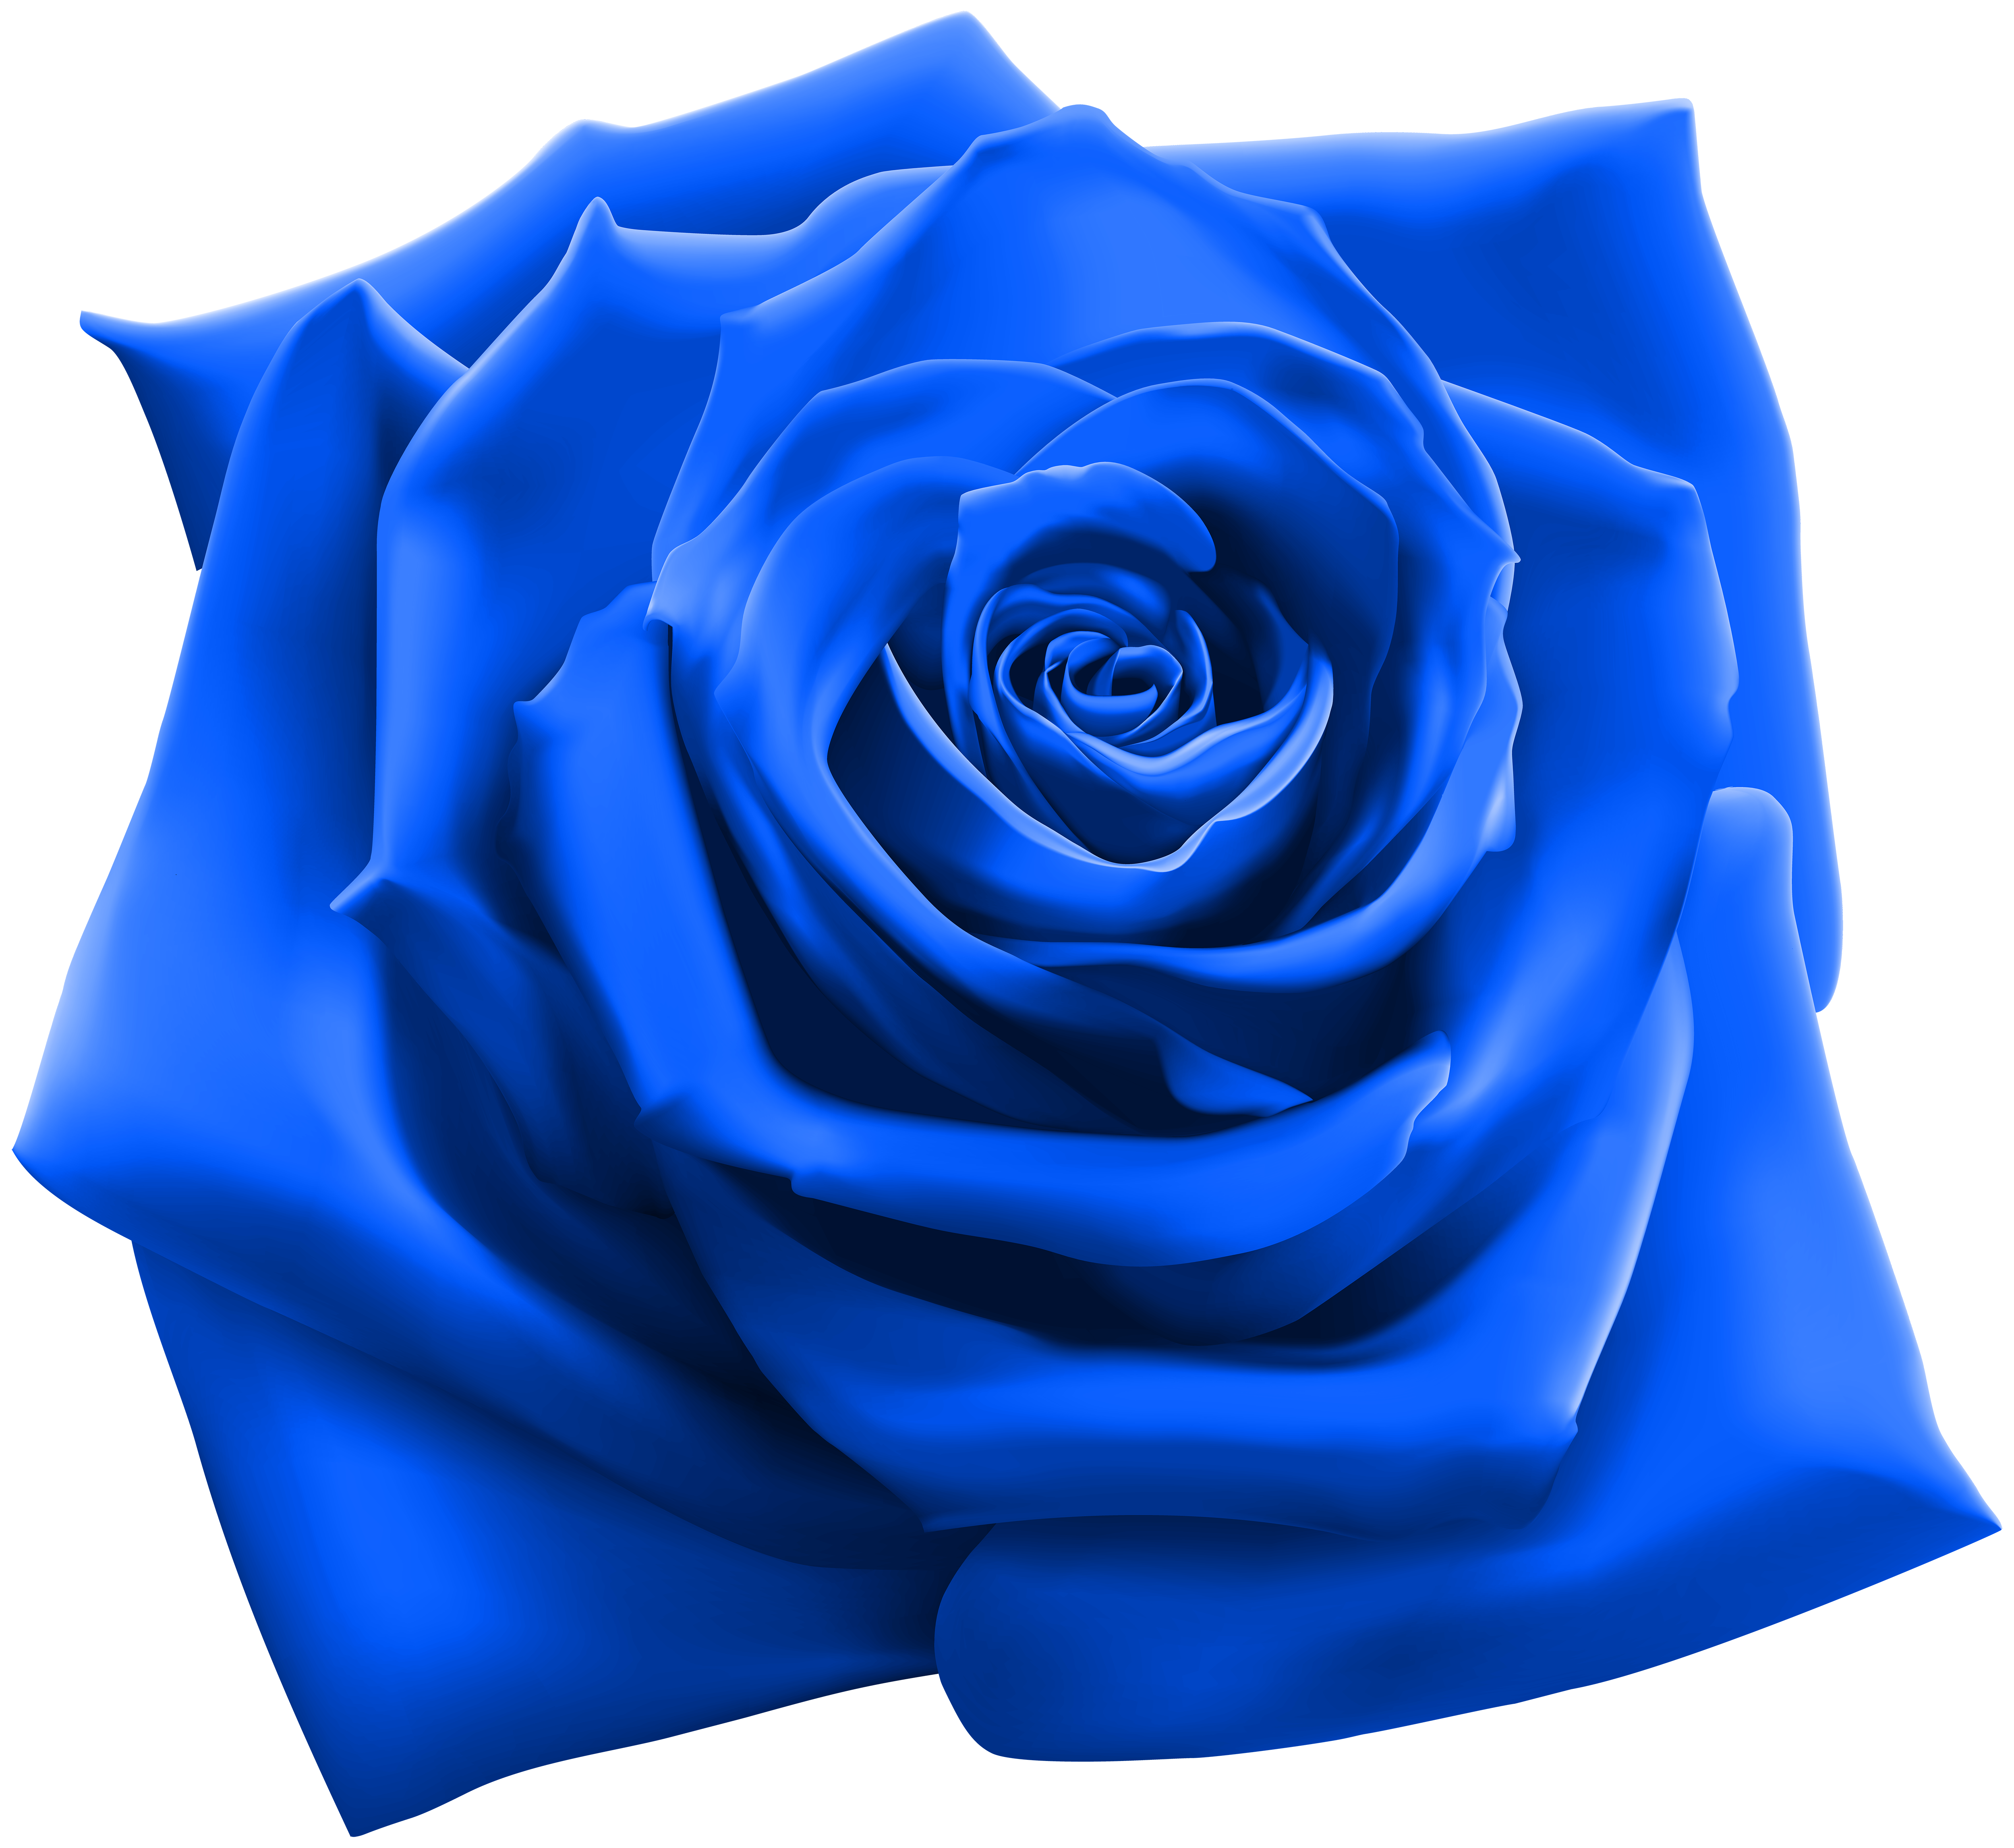 Blue Rose PNG Clipart Image | Gallery Yopriceville - High-Quality ...